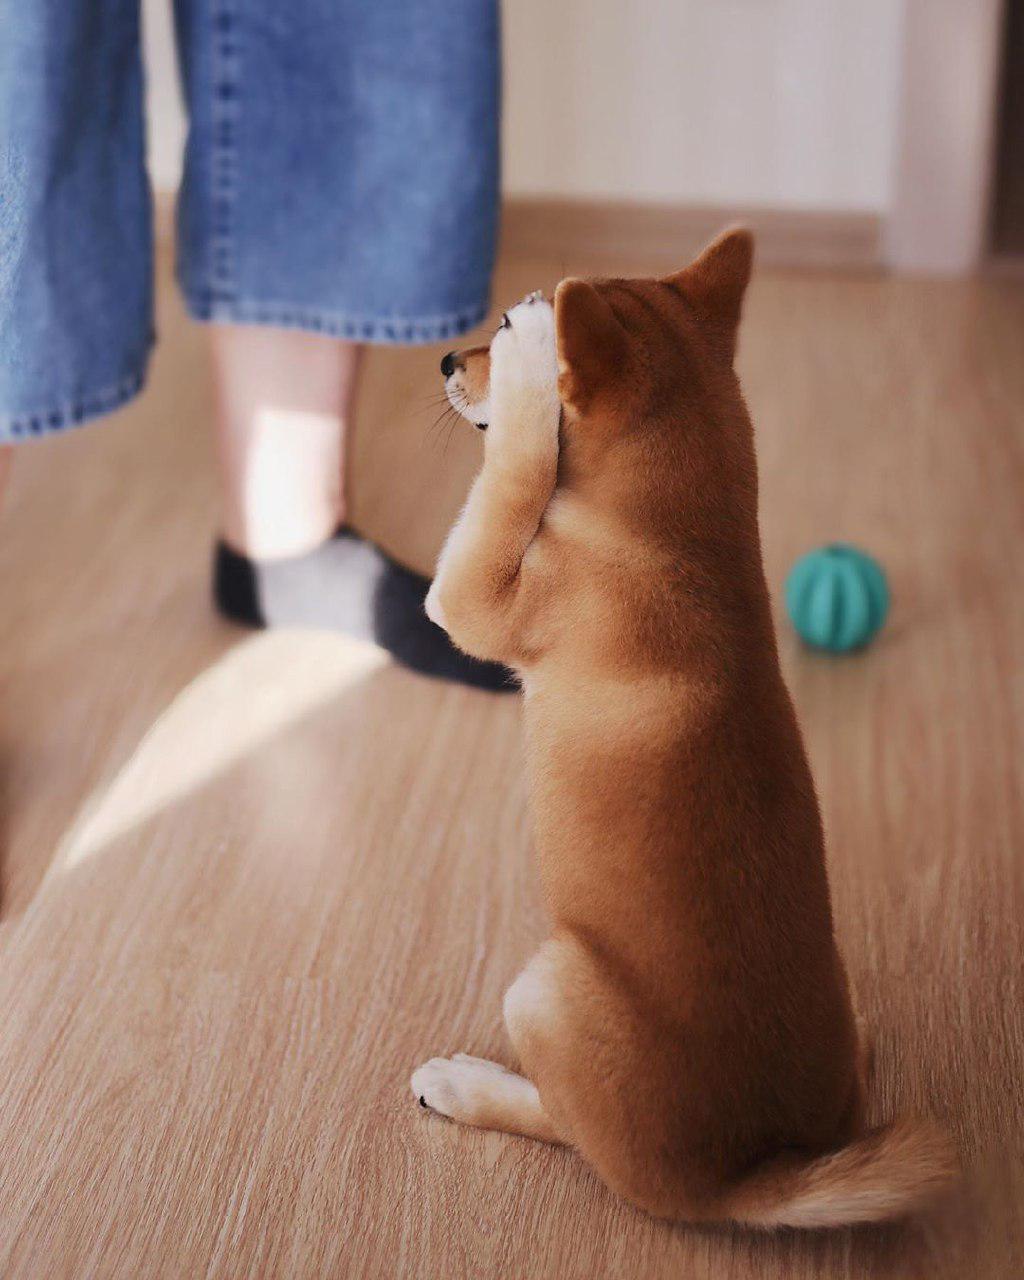 A Shiba Inu sitting on the floor while covering its eyes with it paws